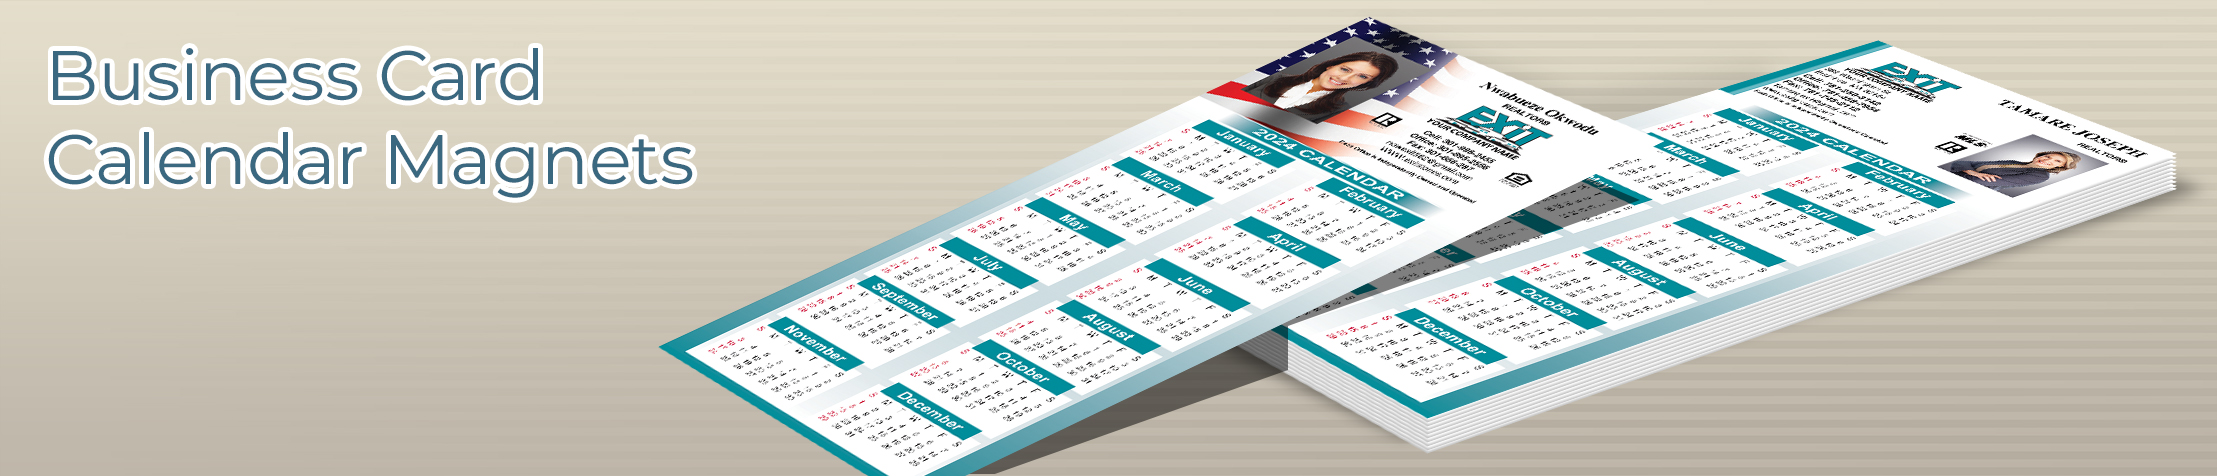 Exit Realty Business Card Calendar Magnets - Exit Realty approved vendor 2019 calendars with photo and contact info | BestPrintBuy.com